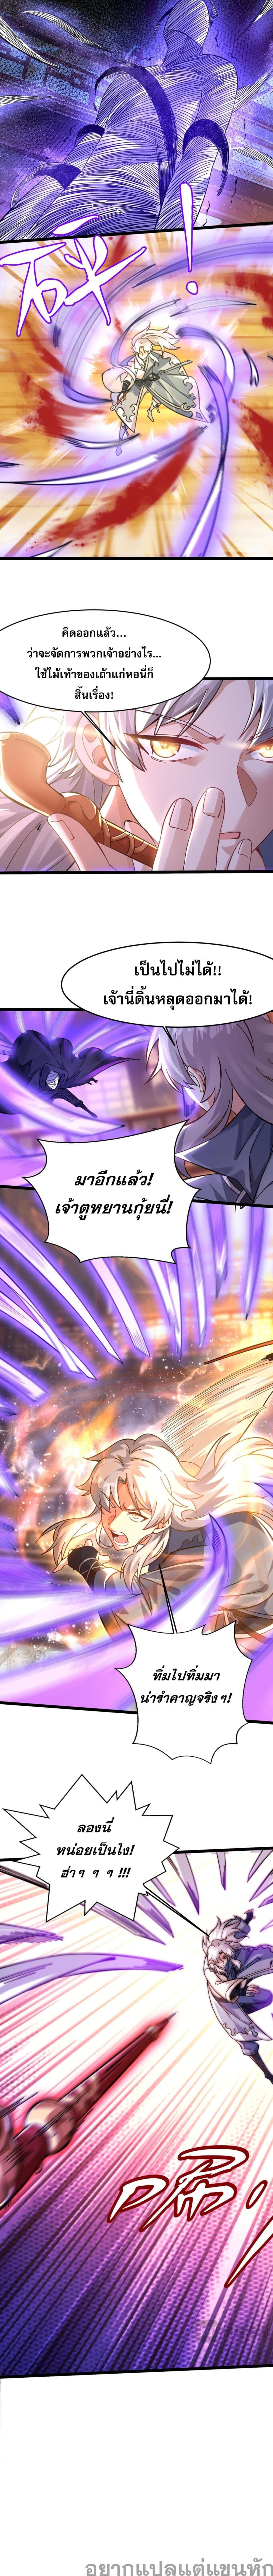 I Have Hundreds of Millions of Years of Cultivation ข้ามีพลังบำเพ็ญหนึ่งล้านปี 6-6